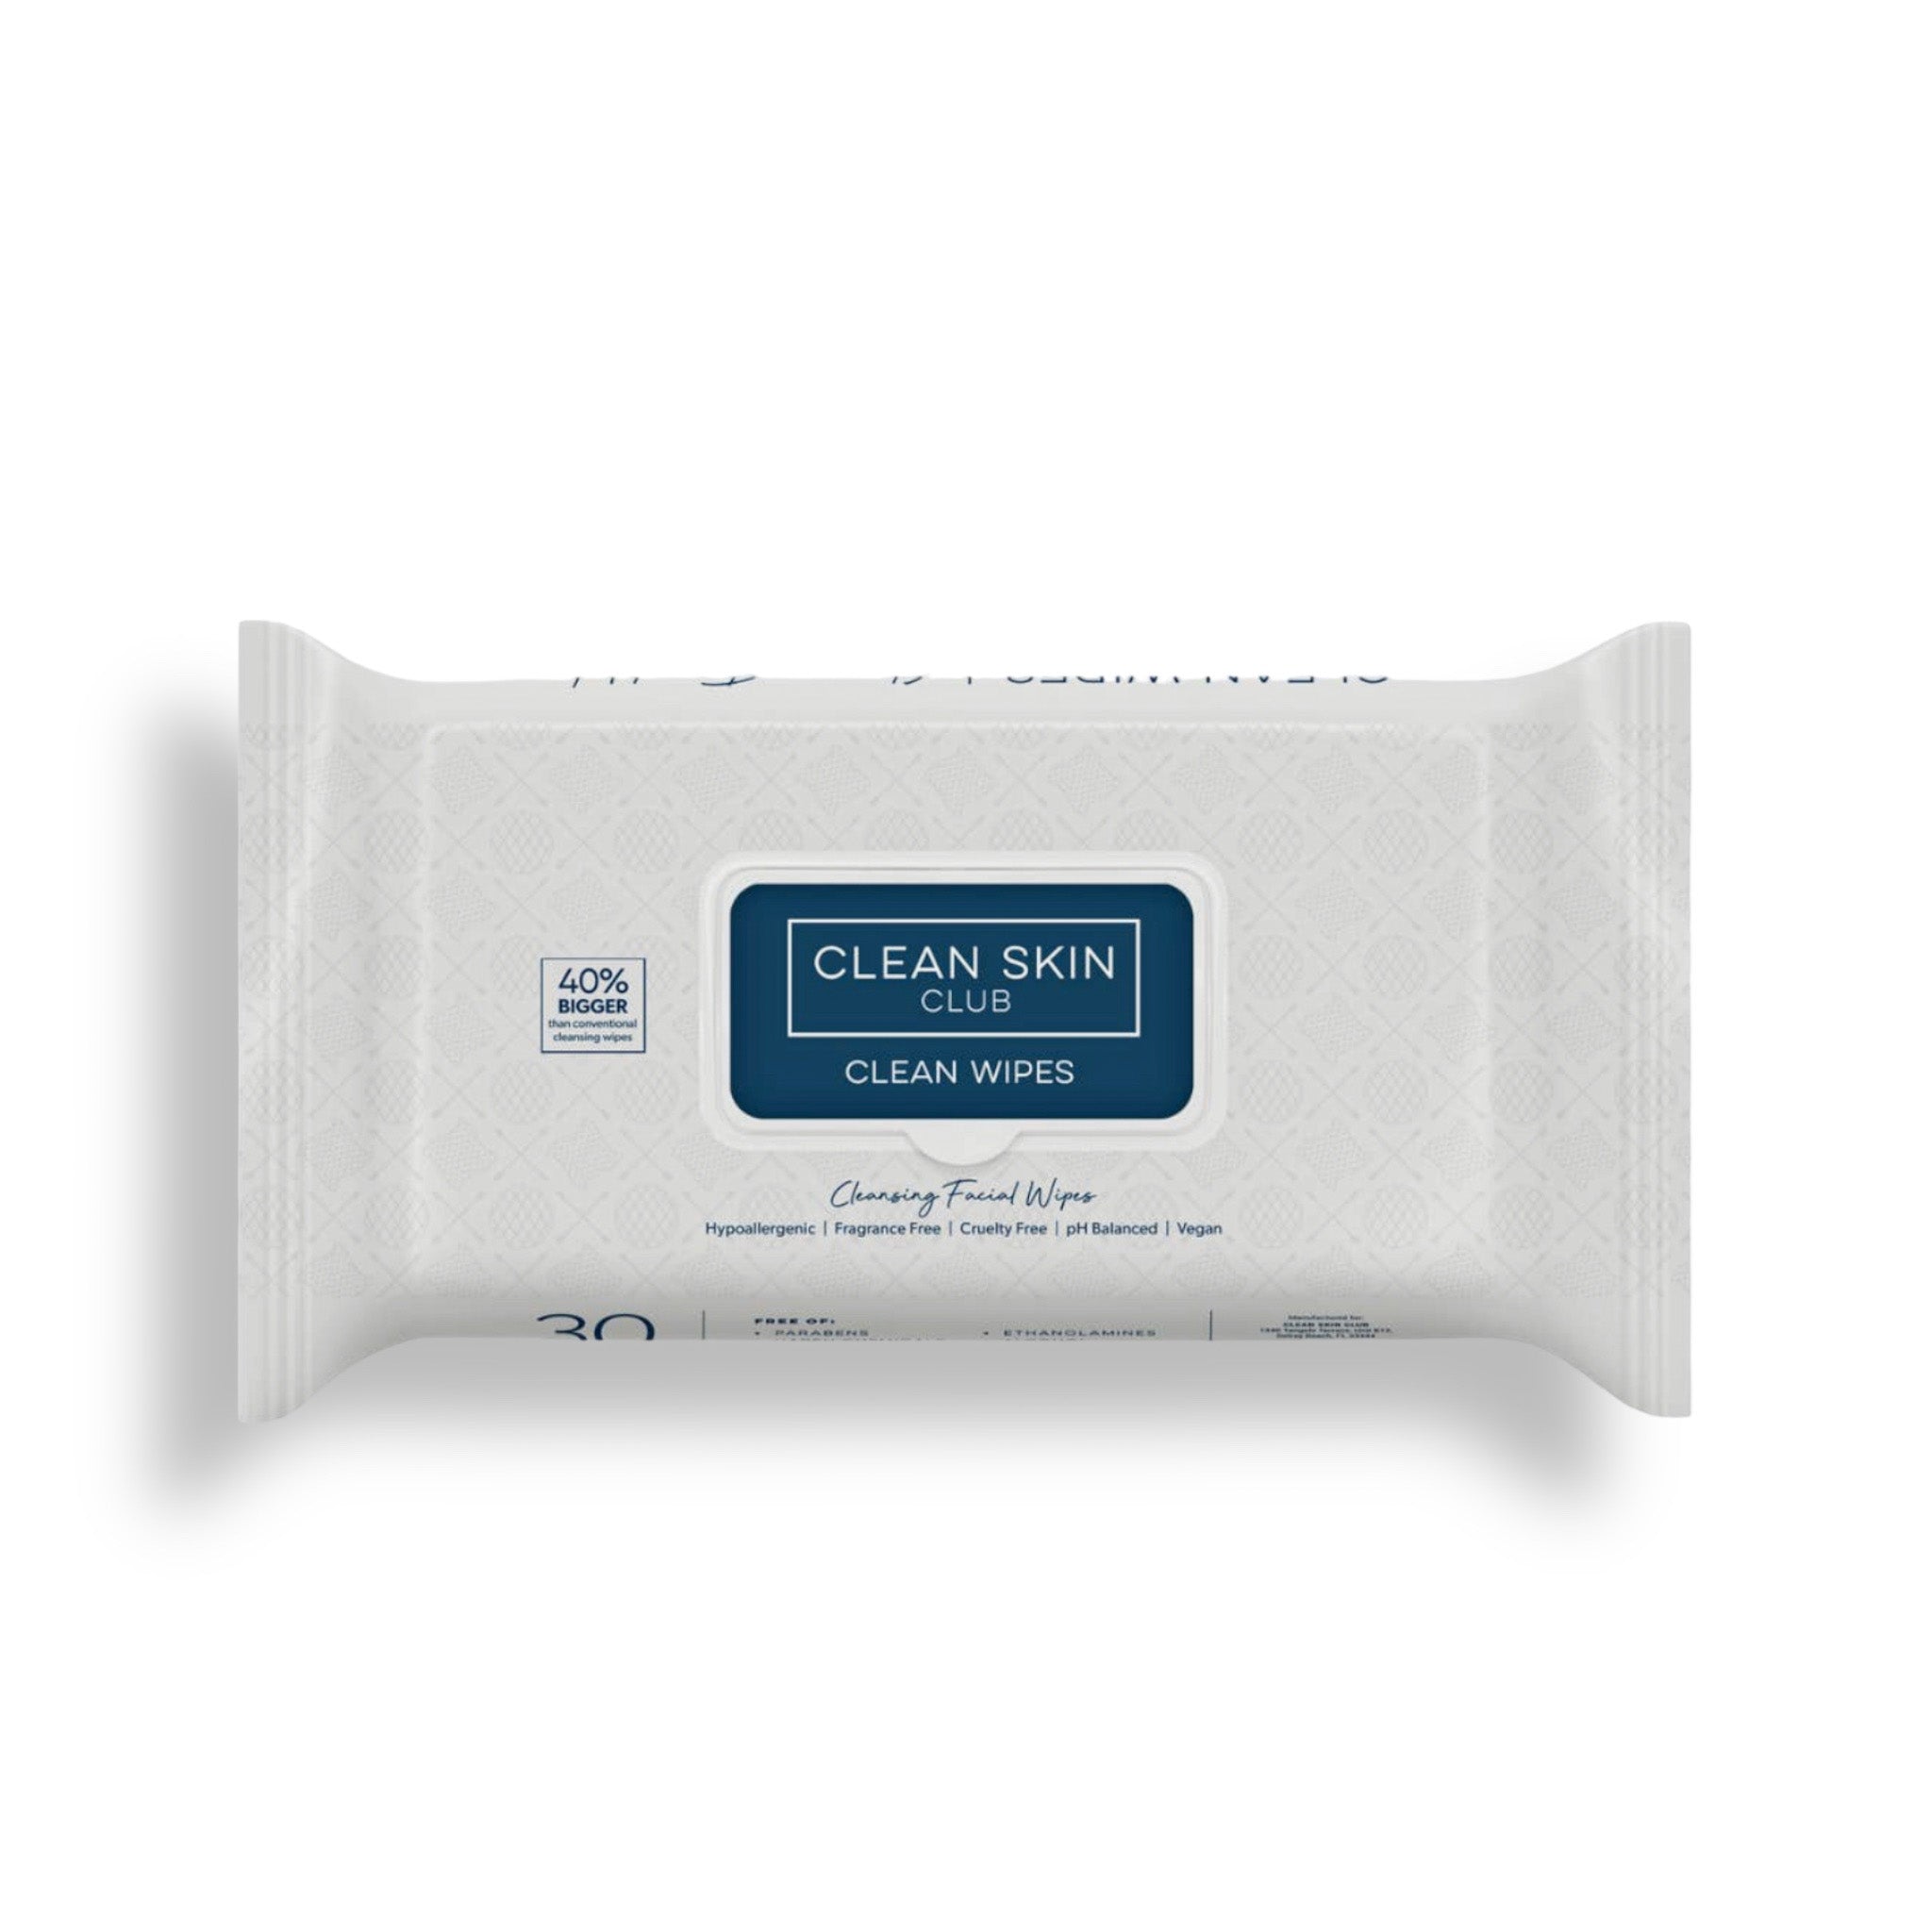 Clean Skin Club CLEANSING FACIAL WIPES 30 ct